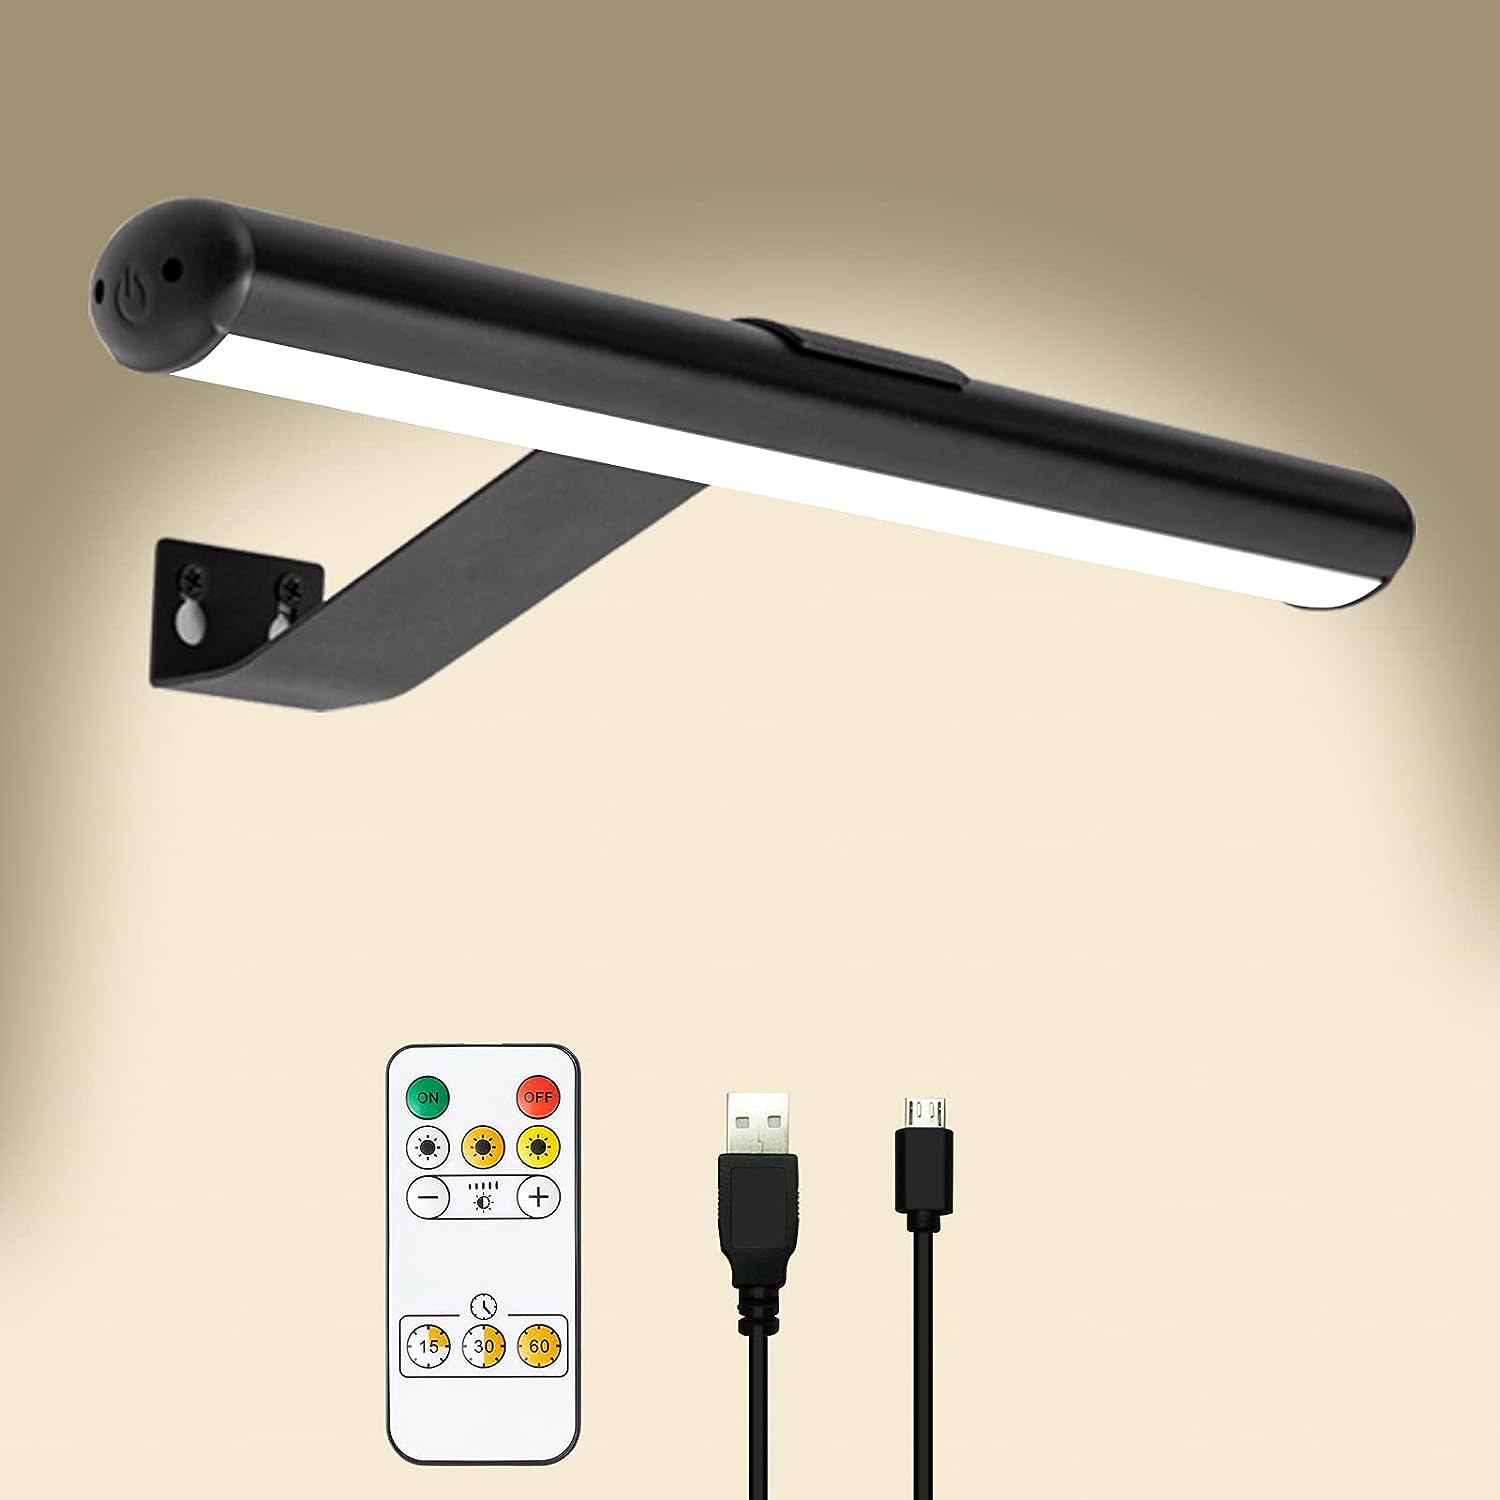 TINTINDOC Wireless LED Picture Light with [...]